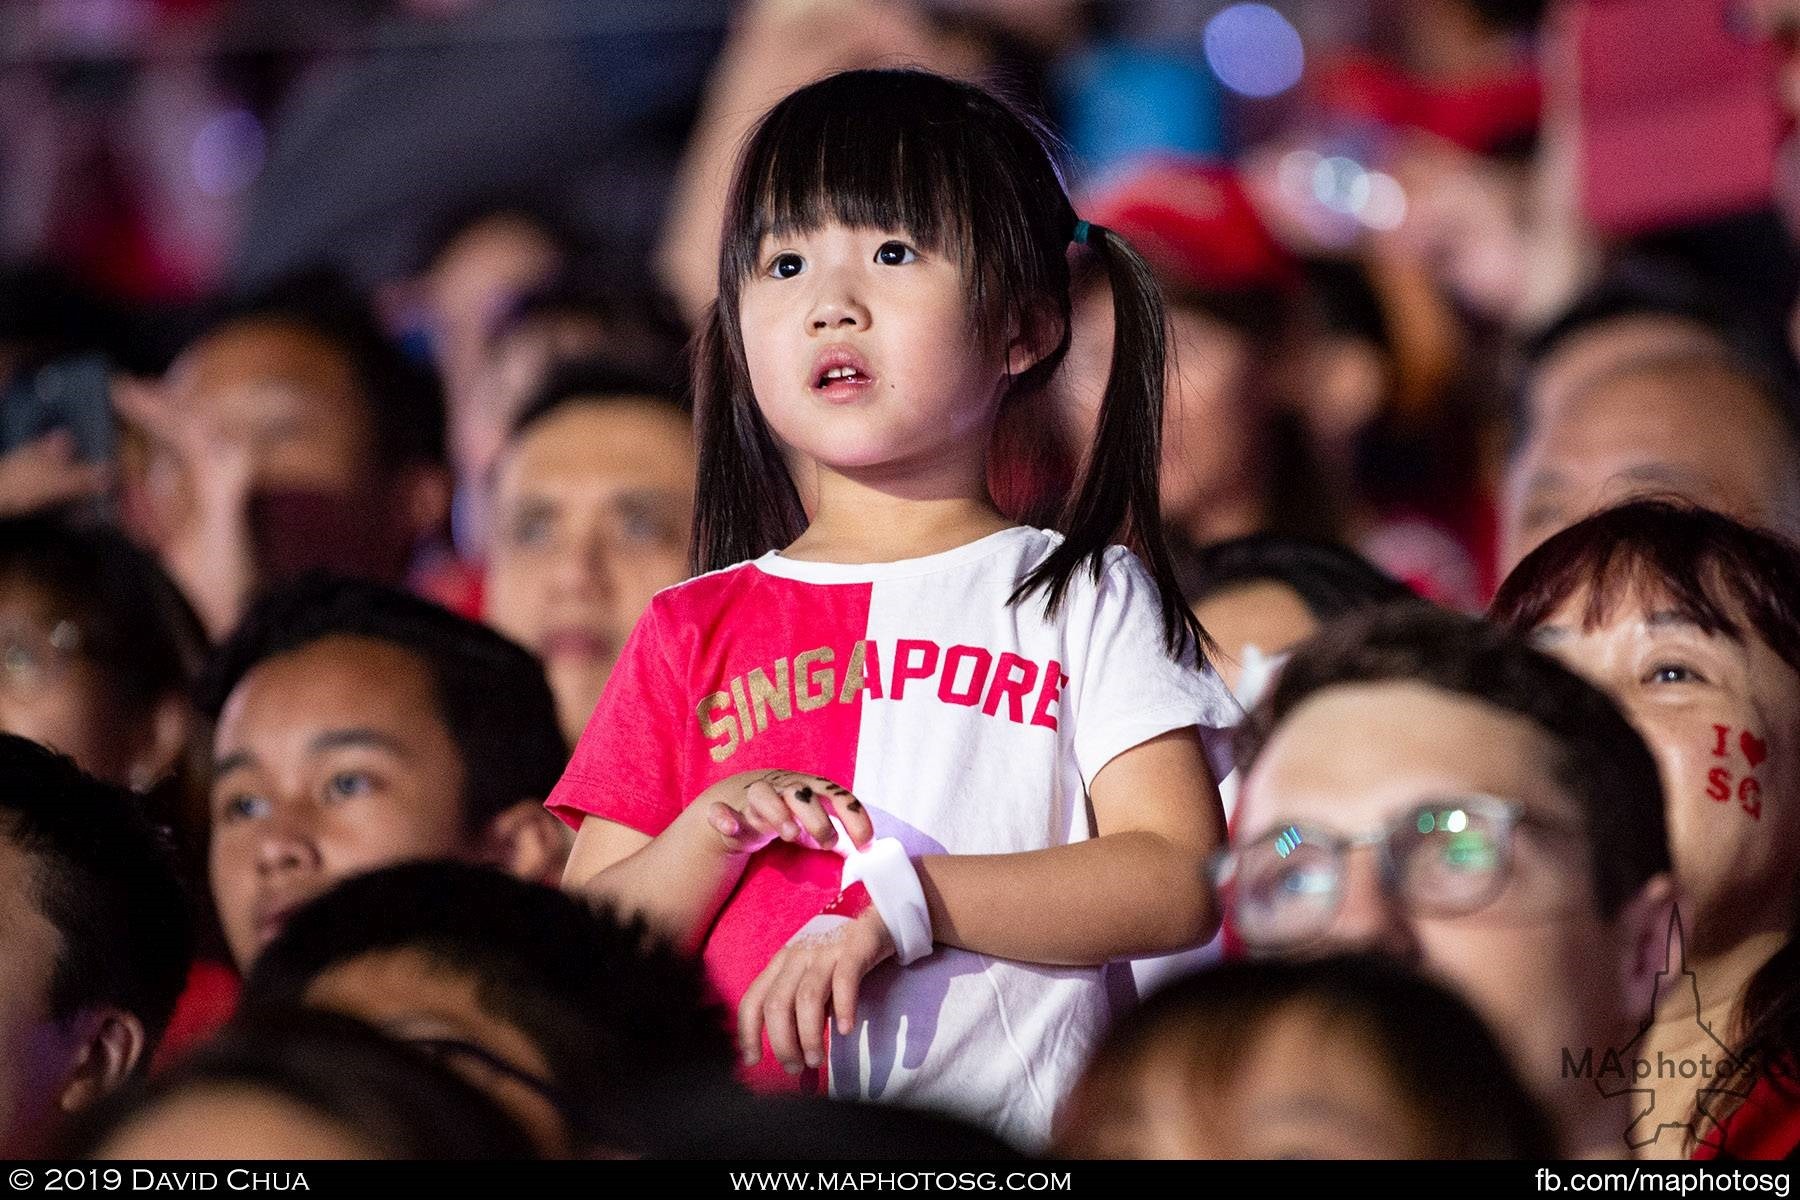 A young girl stood fascinated by the show